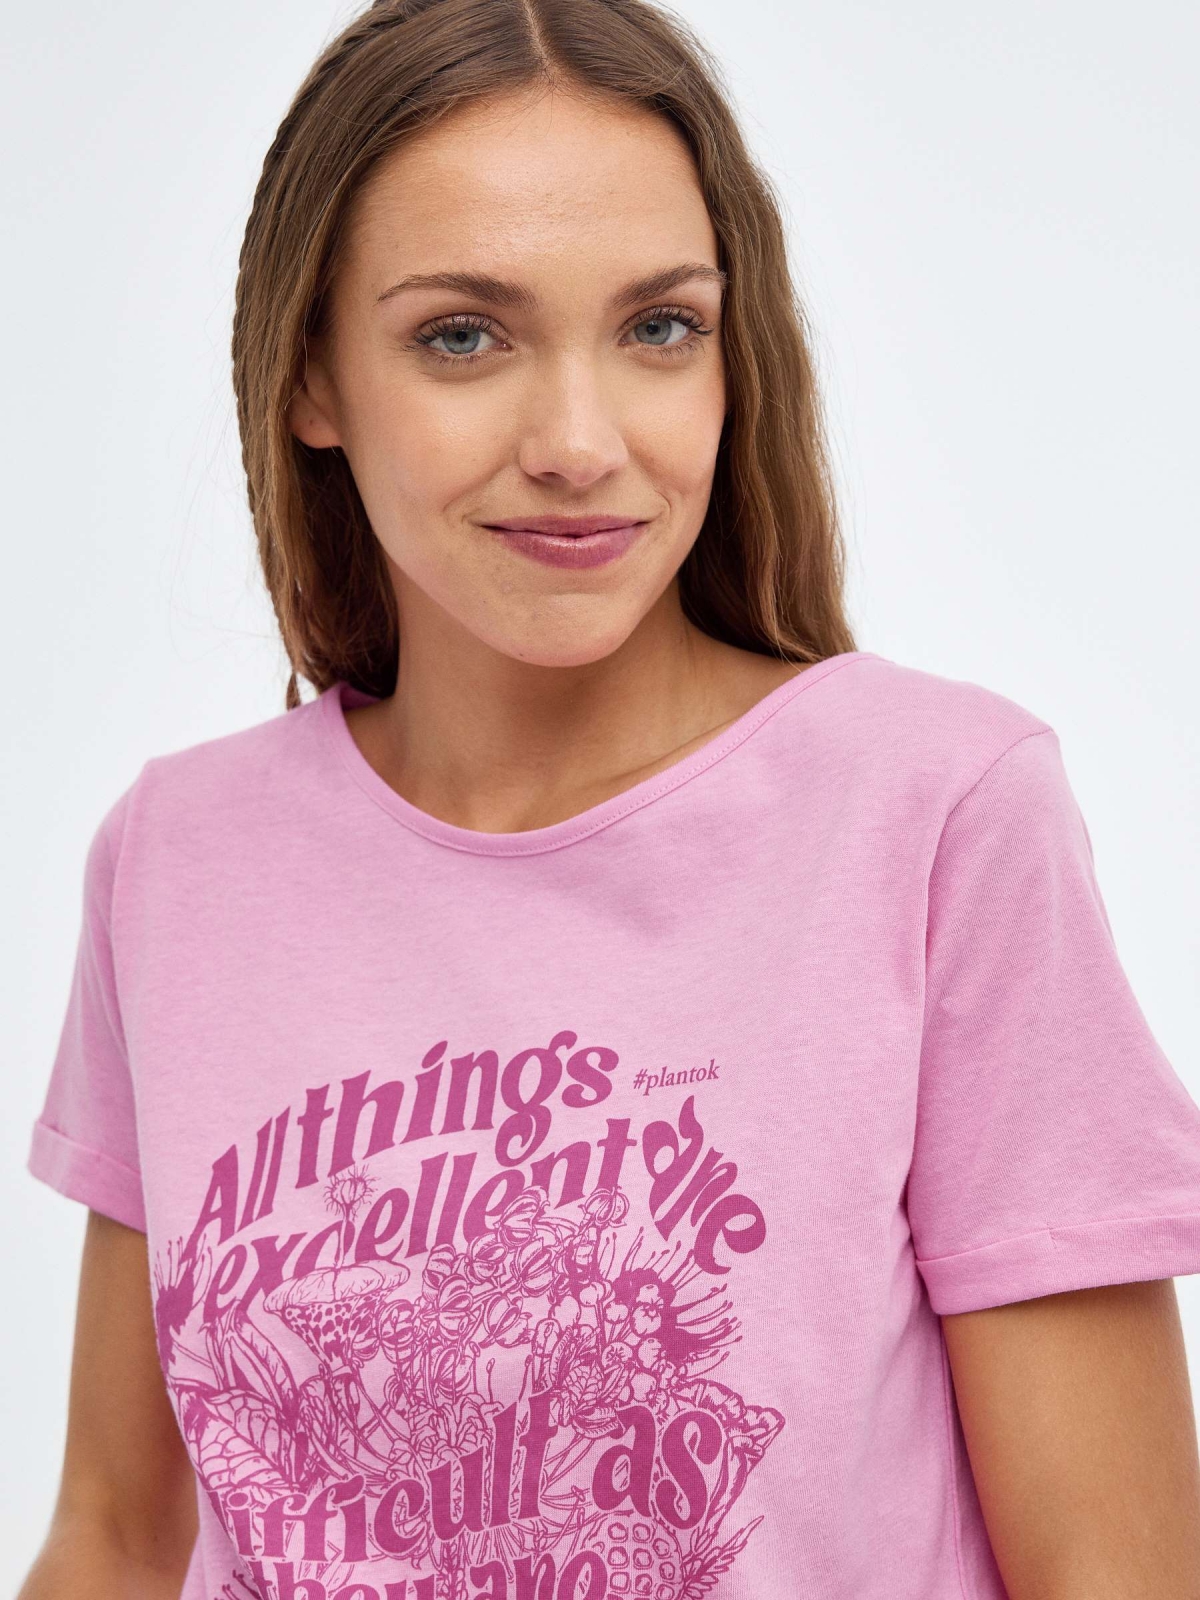 All Things Excellent T-shirt pink detail view